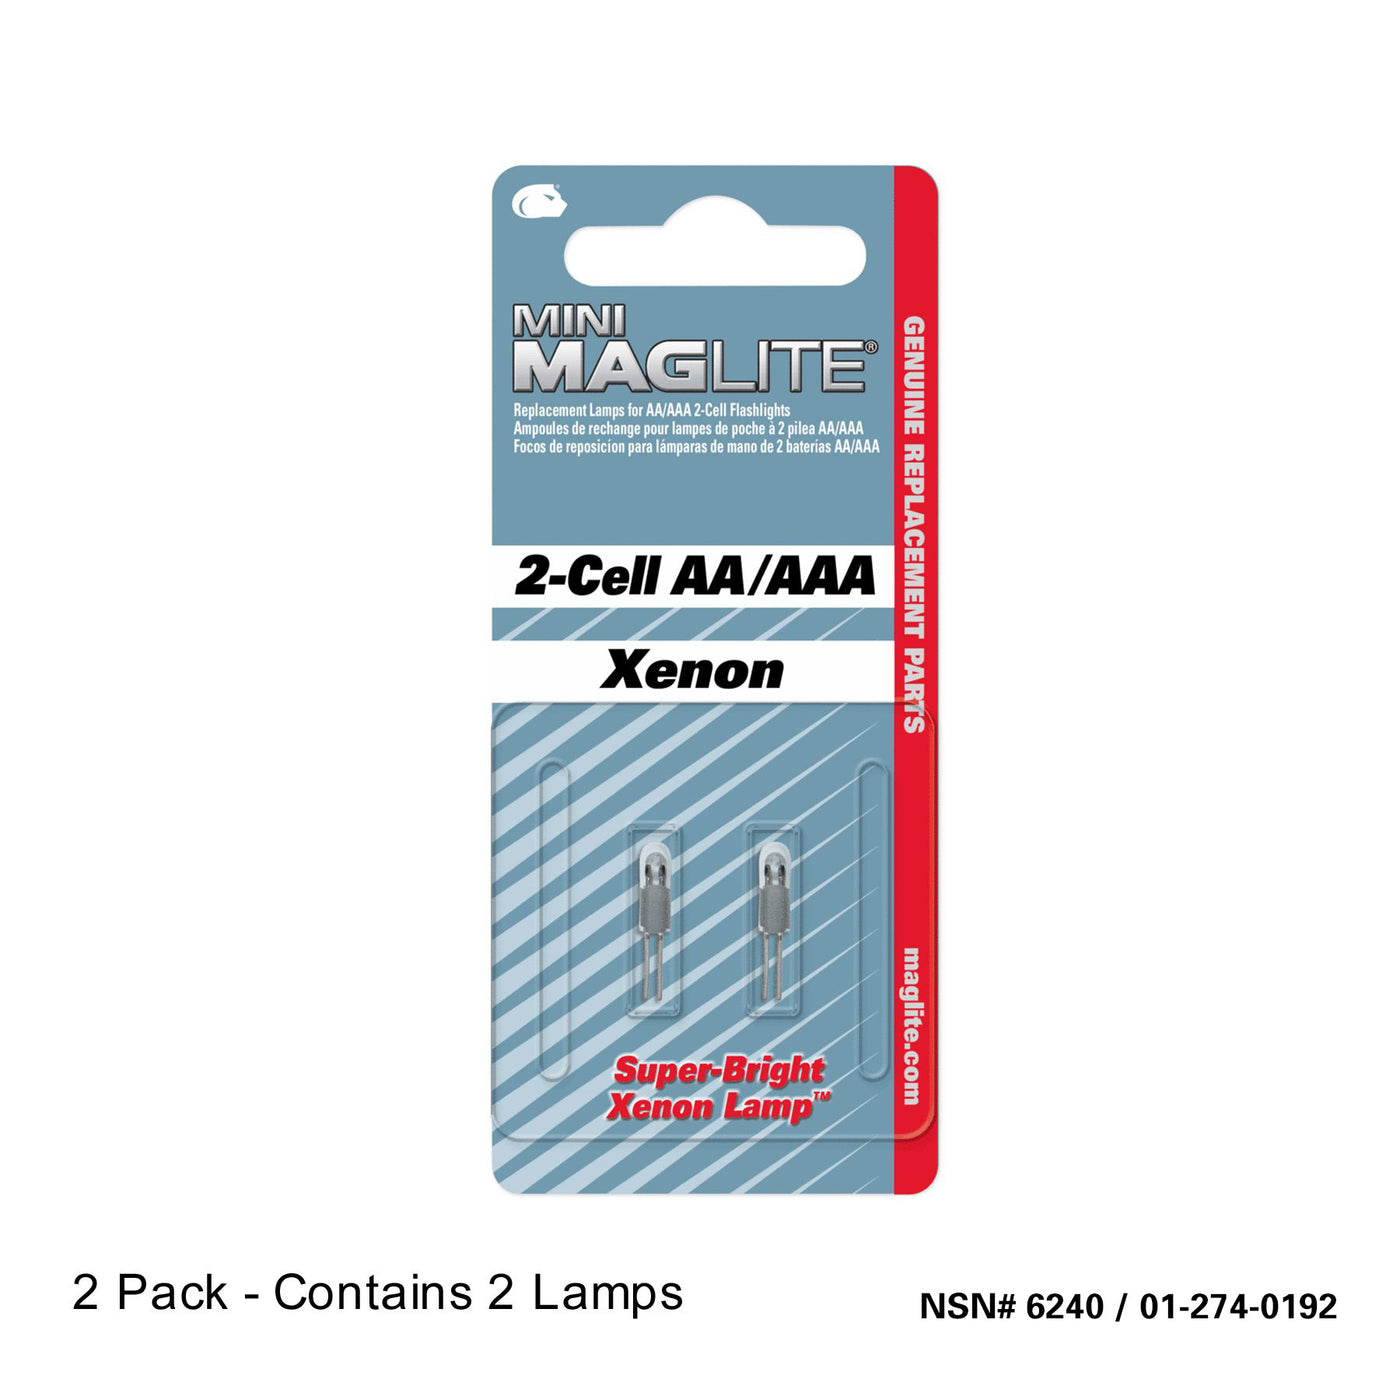 Replacement Xenon Lamp-Bulb for Mini Maglite 2-Cell AA/AAA Flashlight